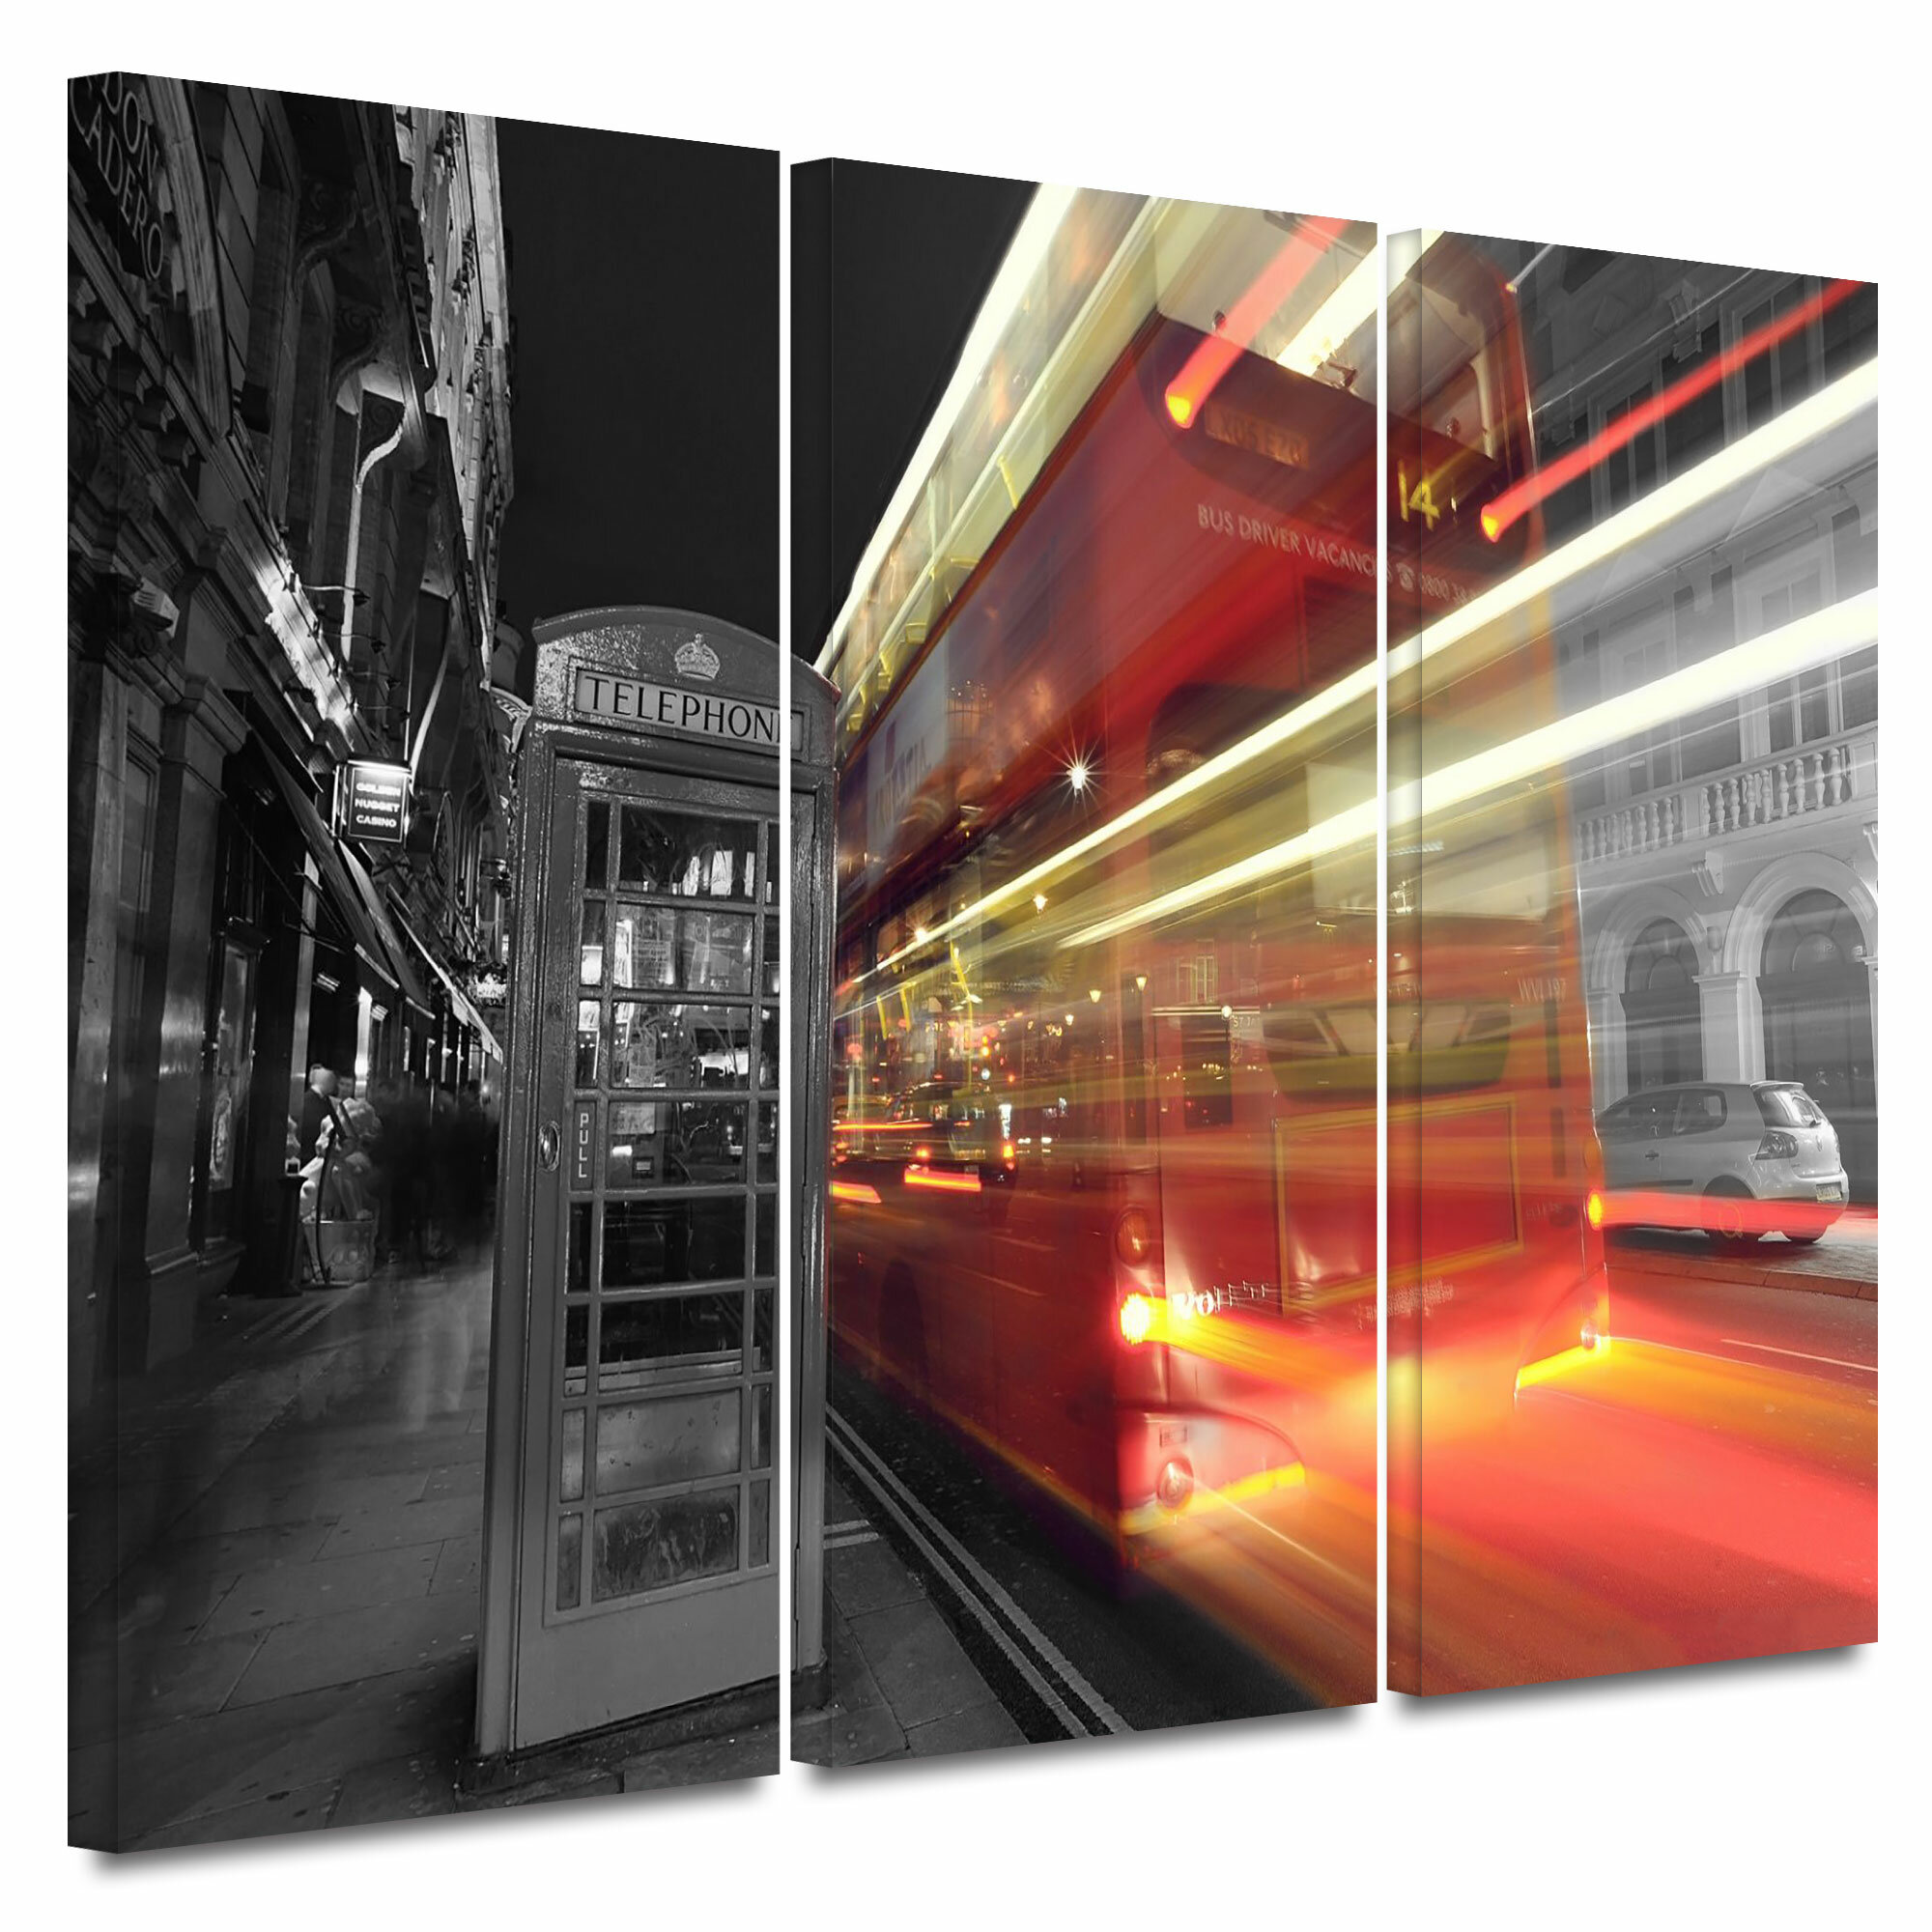 ArtWall 3-Piece Cody Yorks Cleveland 20 Gallery-Wrapped Canvas Set 36 by 72-Inch